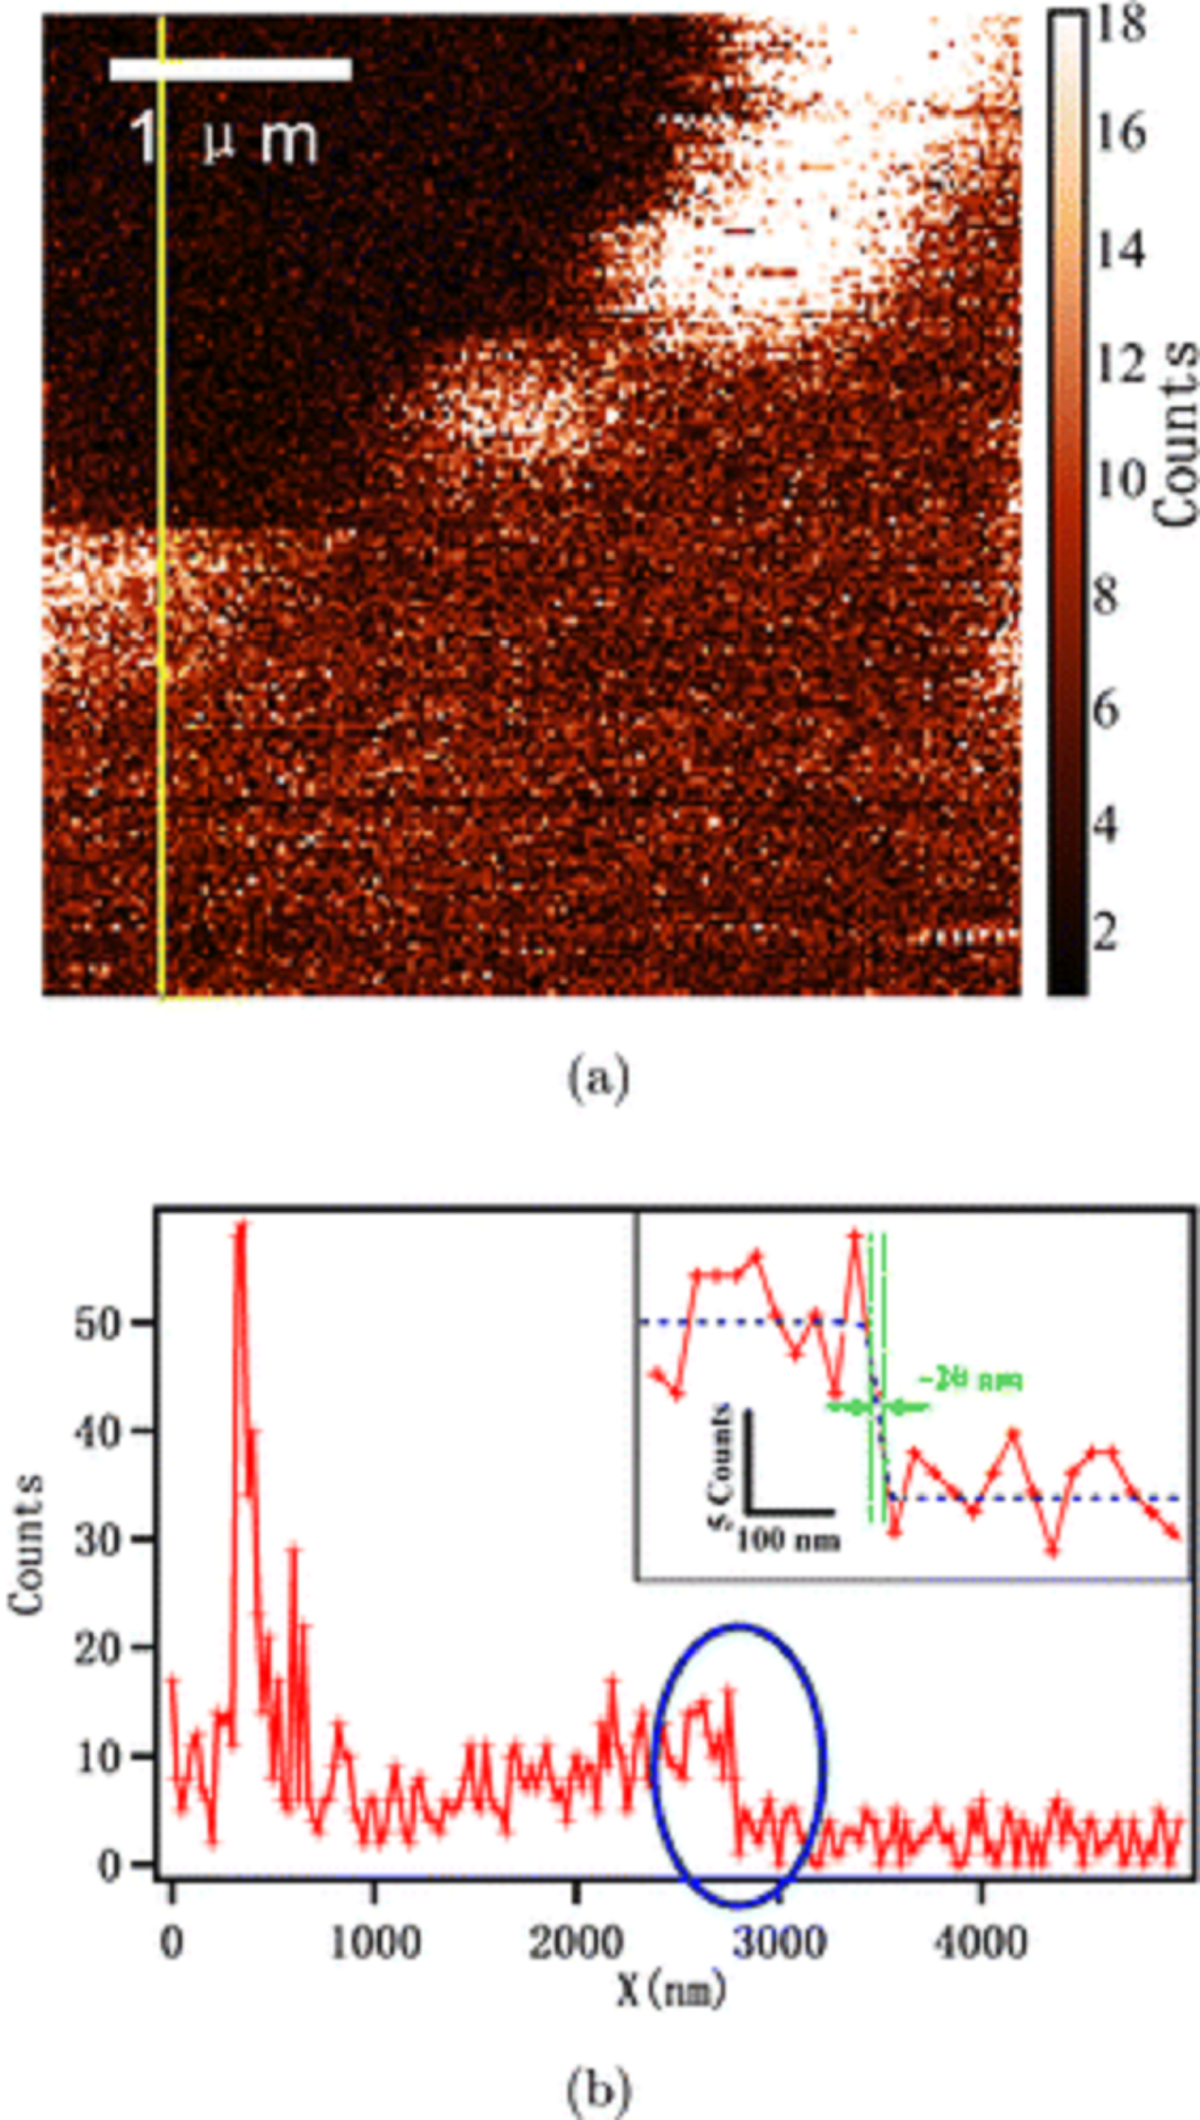 Fig. 6. from “High-resolution imaging of graphene by tip-enhanced coherent anti-Stokes Raman scattering “ by Xiaolong Kou  et al. (a) TECARS imaging of graphene. (b) Signal intensity measurement of the yellow line in (a). First single atom layer TECARS (tip-enhanced coherent anti-Stokes Raman scattering ) imaging on Graphene with the highest resolution about 20nm